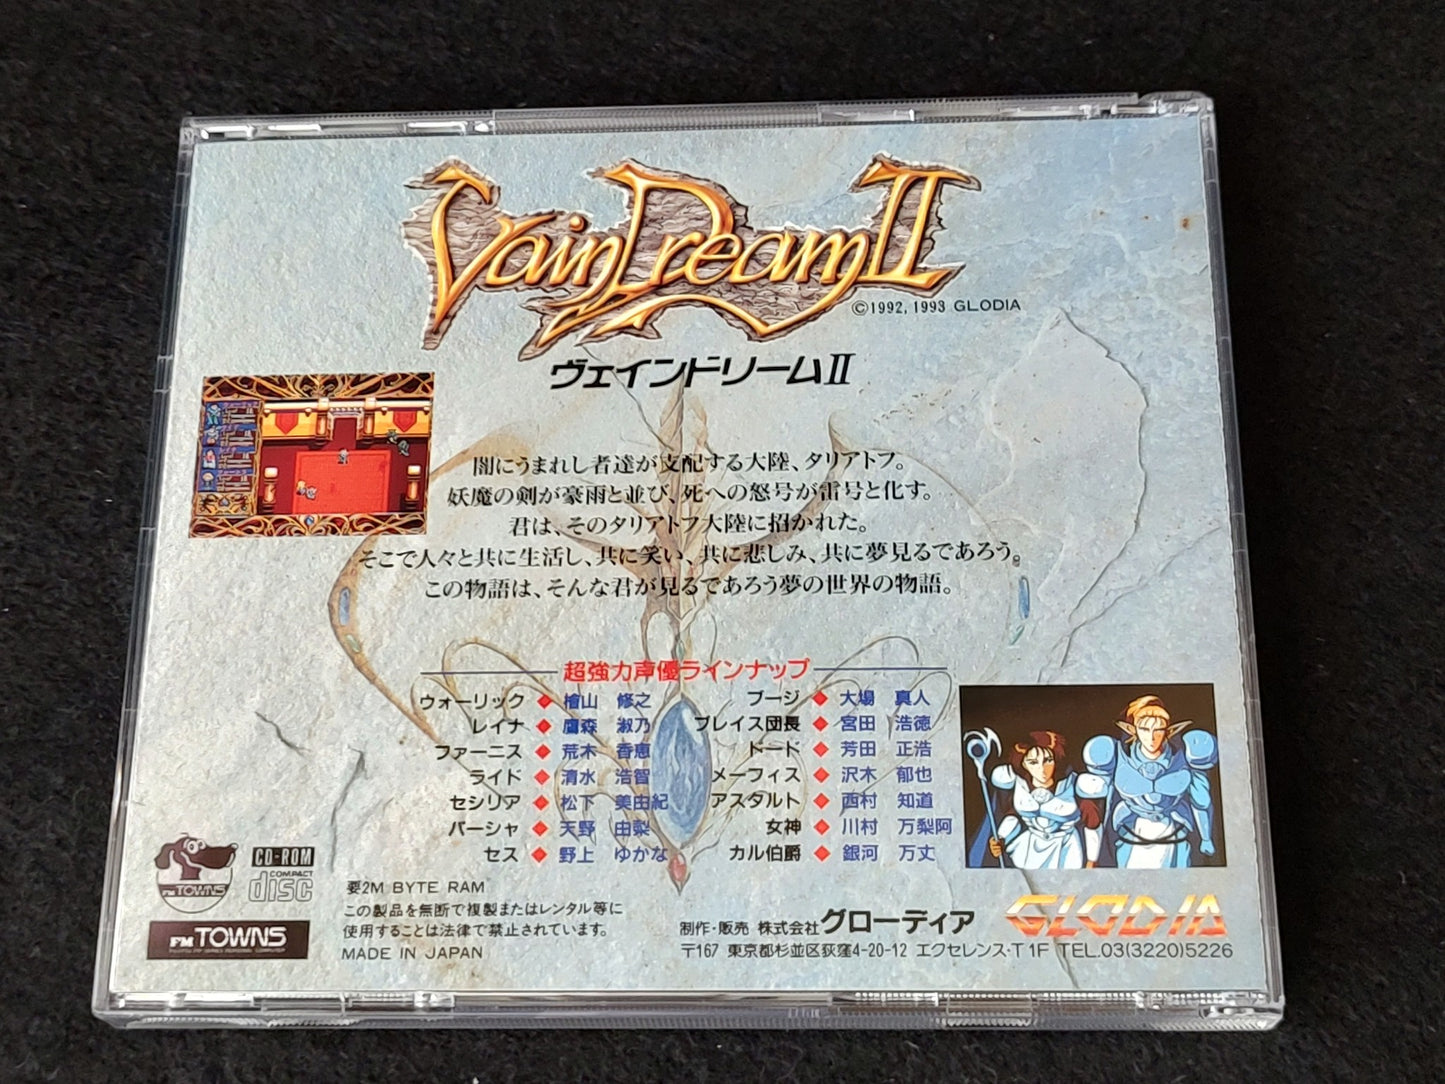 VainDream 2 for FM TOWNS / MARTY RPG Game Disk w/Manual, Floppy, Box set-f0522-